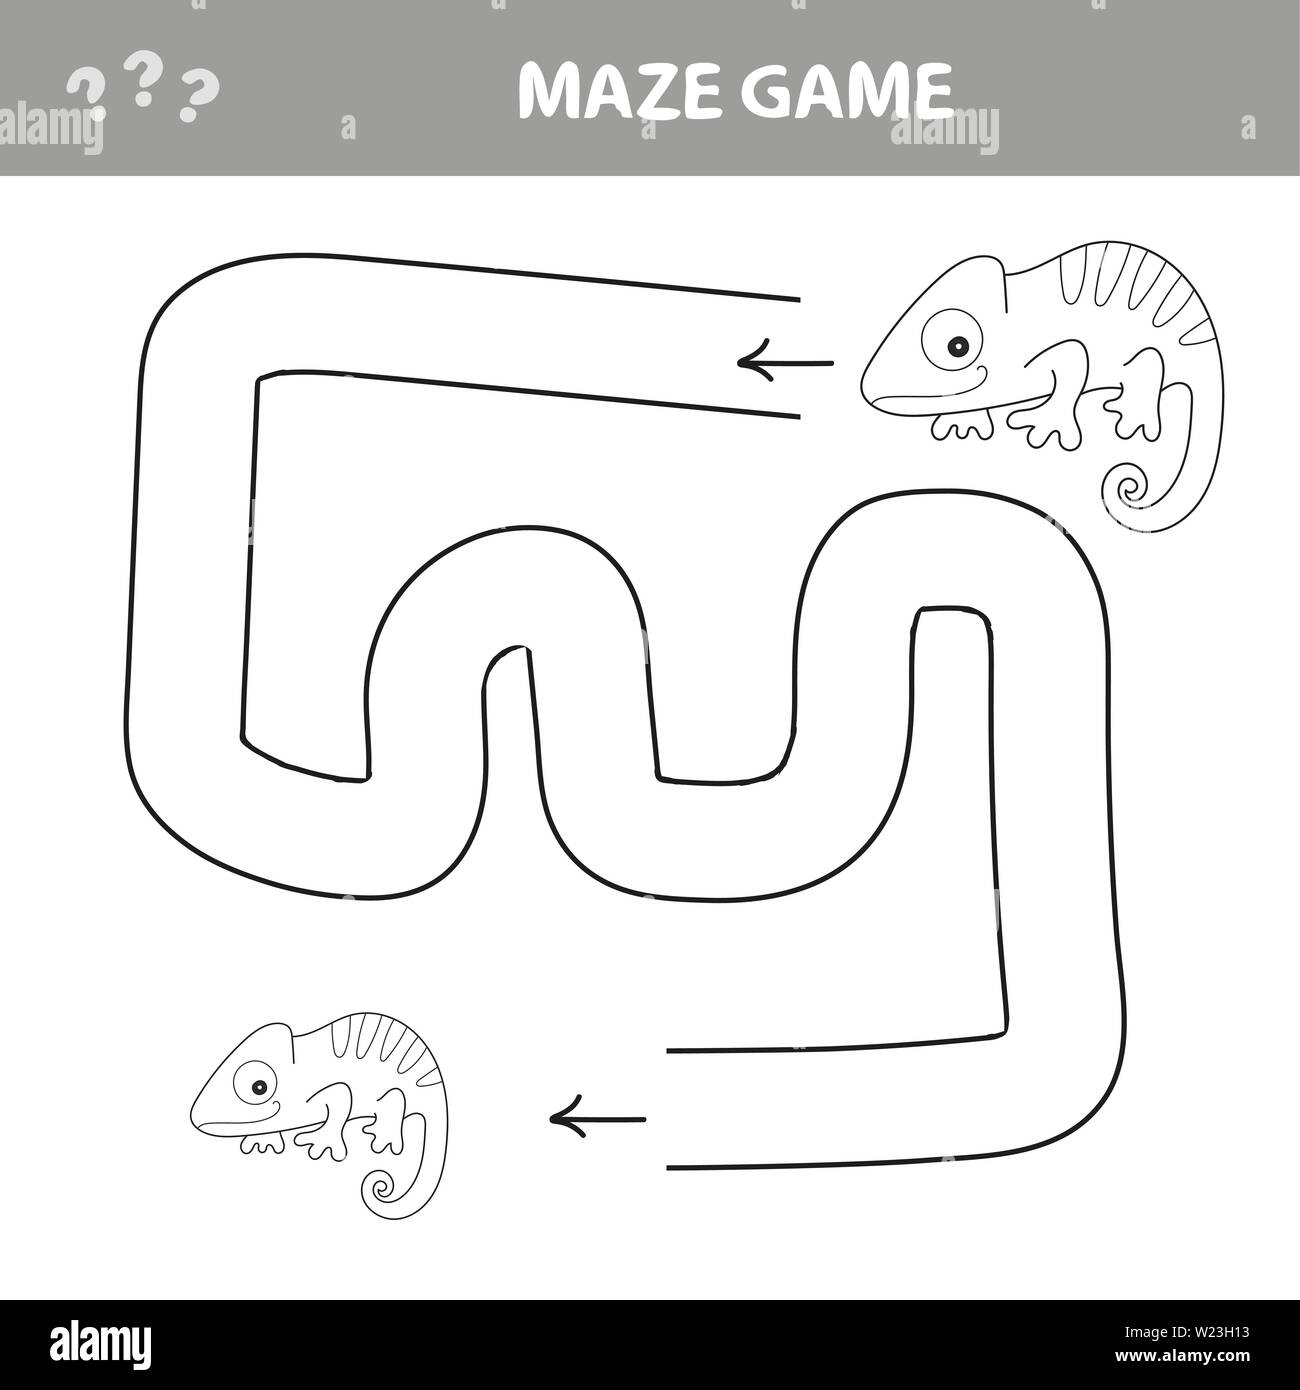 Chameleon Maze Game - help chameleon find his way out of the maze - coloring book Stock Vector